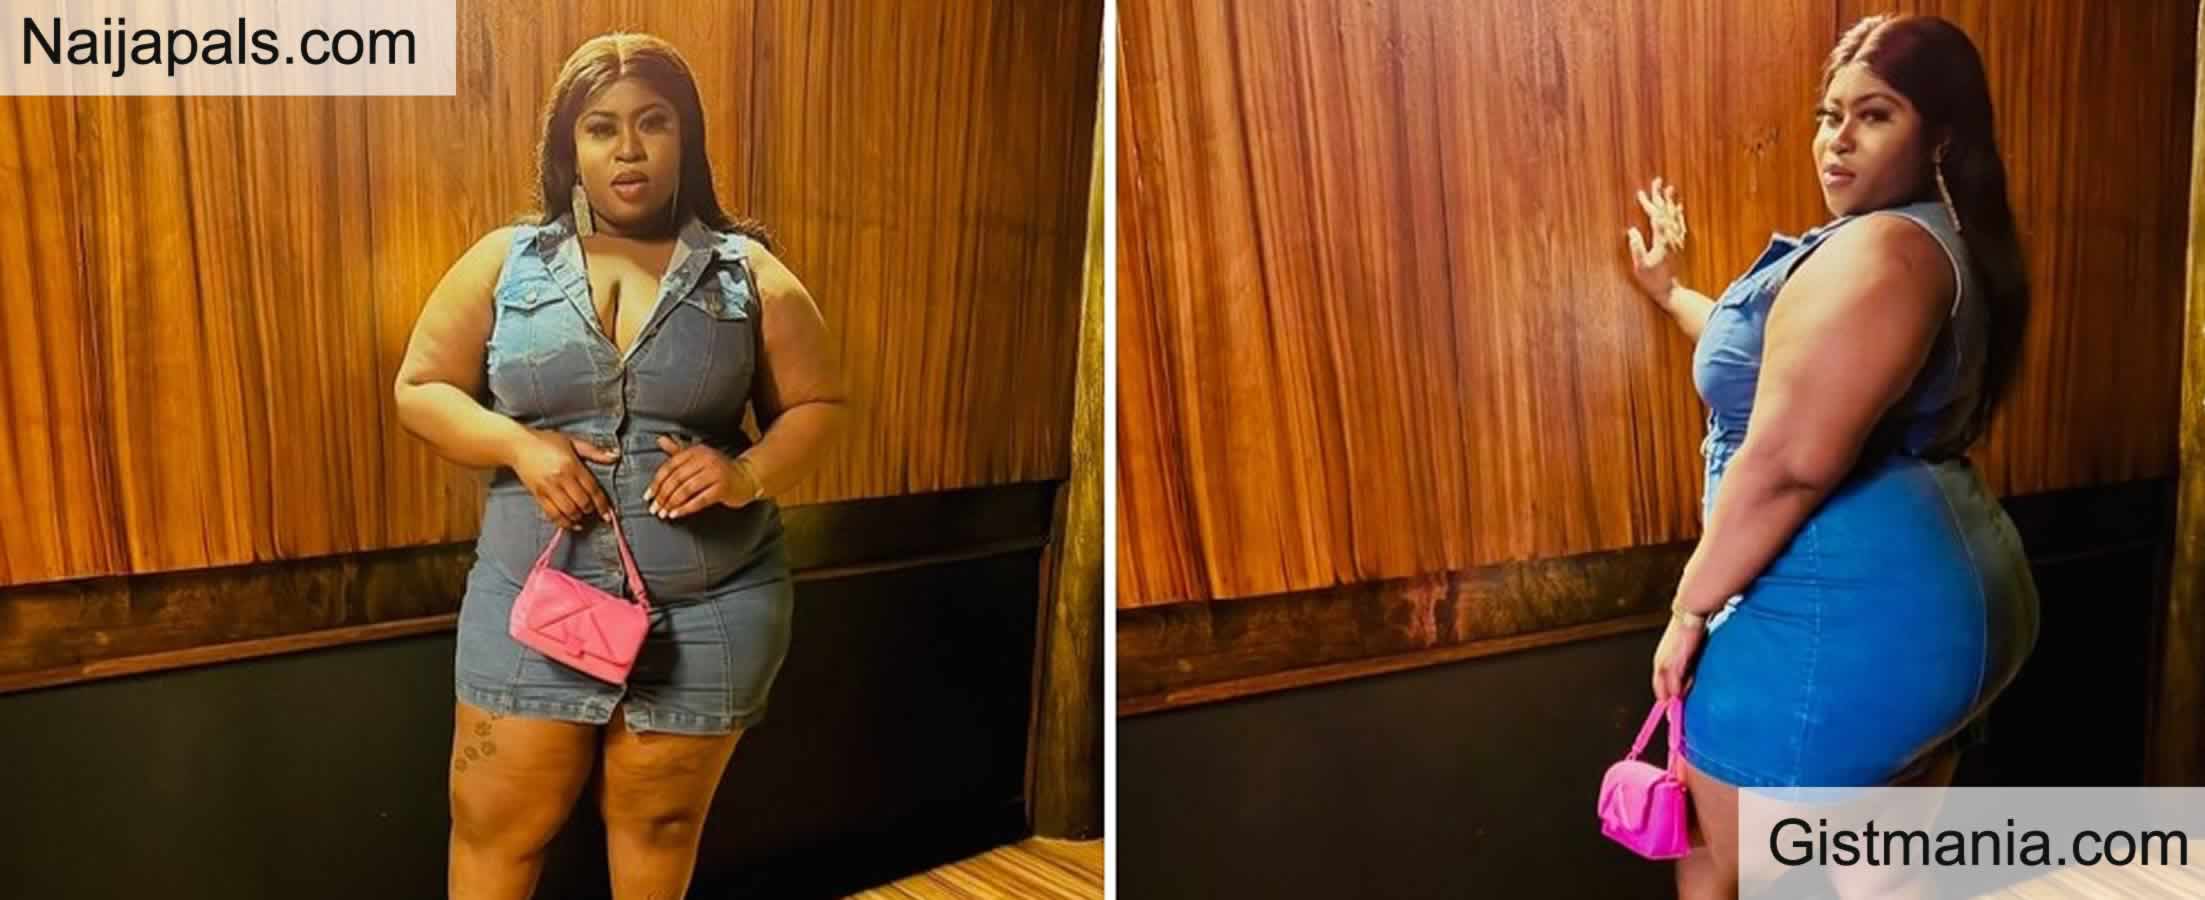 Ghanaian Woman Expose DM From Nigerian man Who Body-Shamed Her Publicly But Woe’s Her Privately